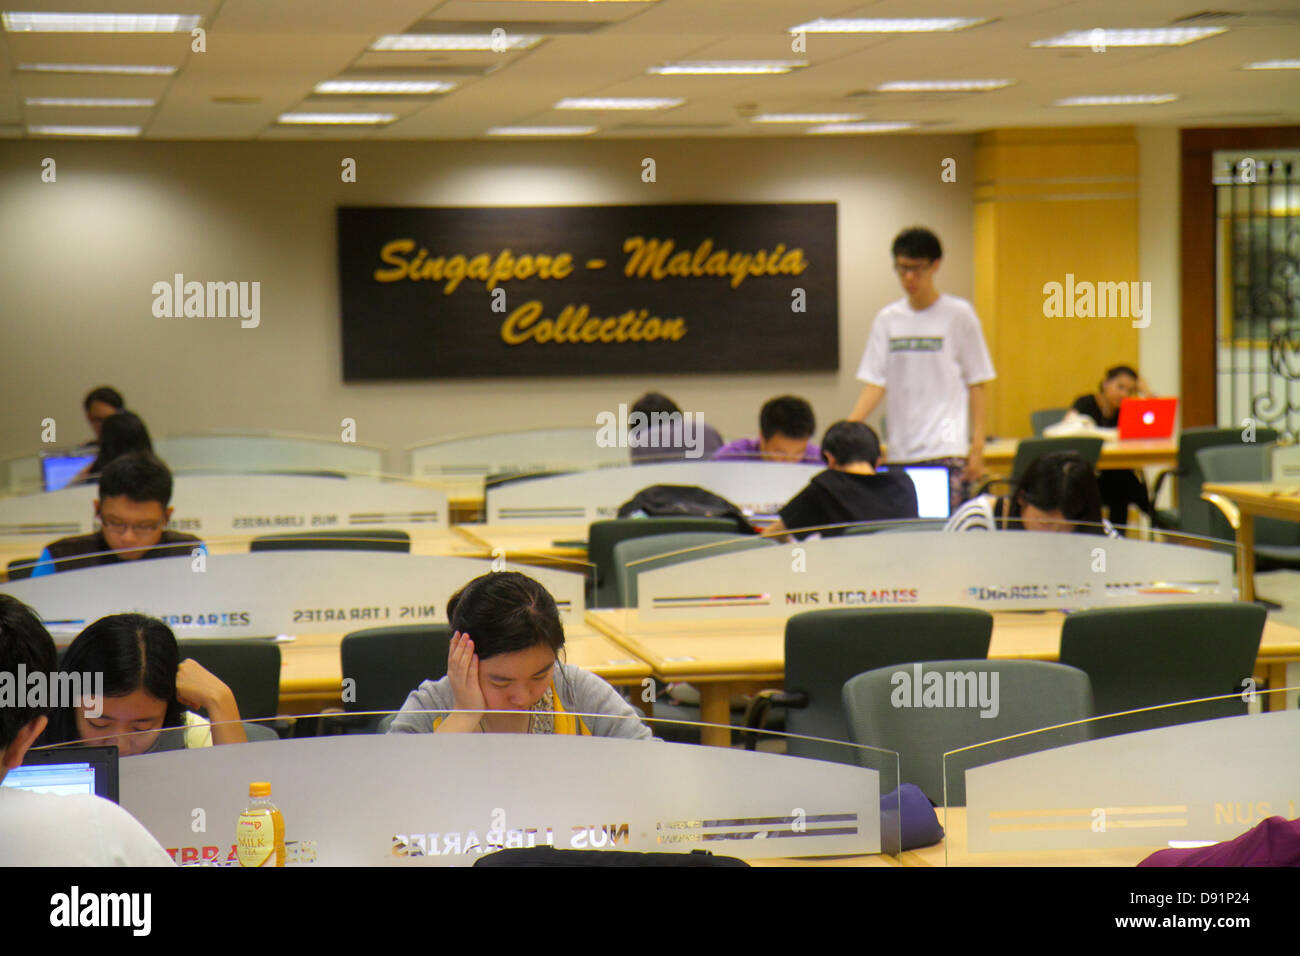 Singapore,National University of Singapore,NUS,school,student students,campus,Central Library,Asian man men male,woman female women,studying,Malaysia Stock Photo